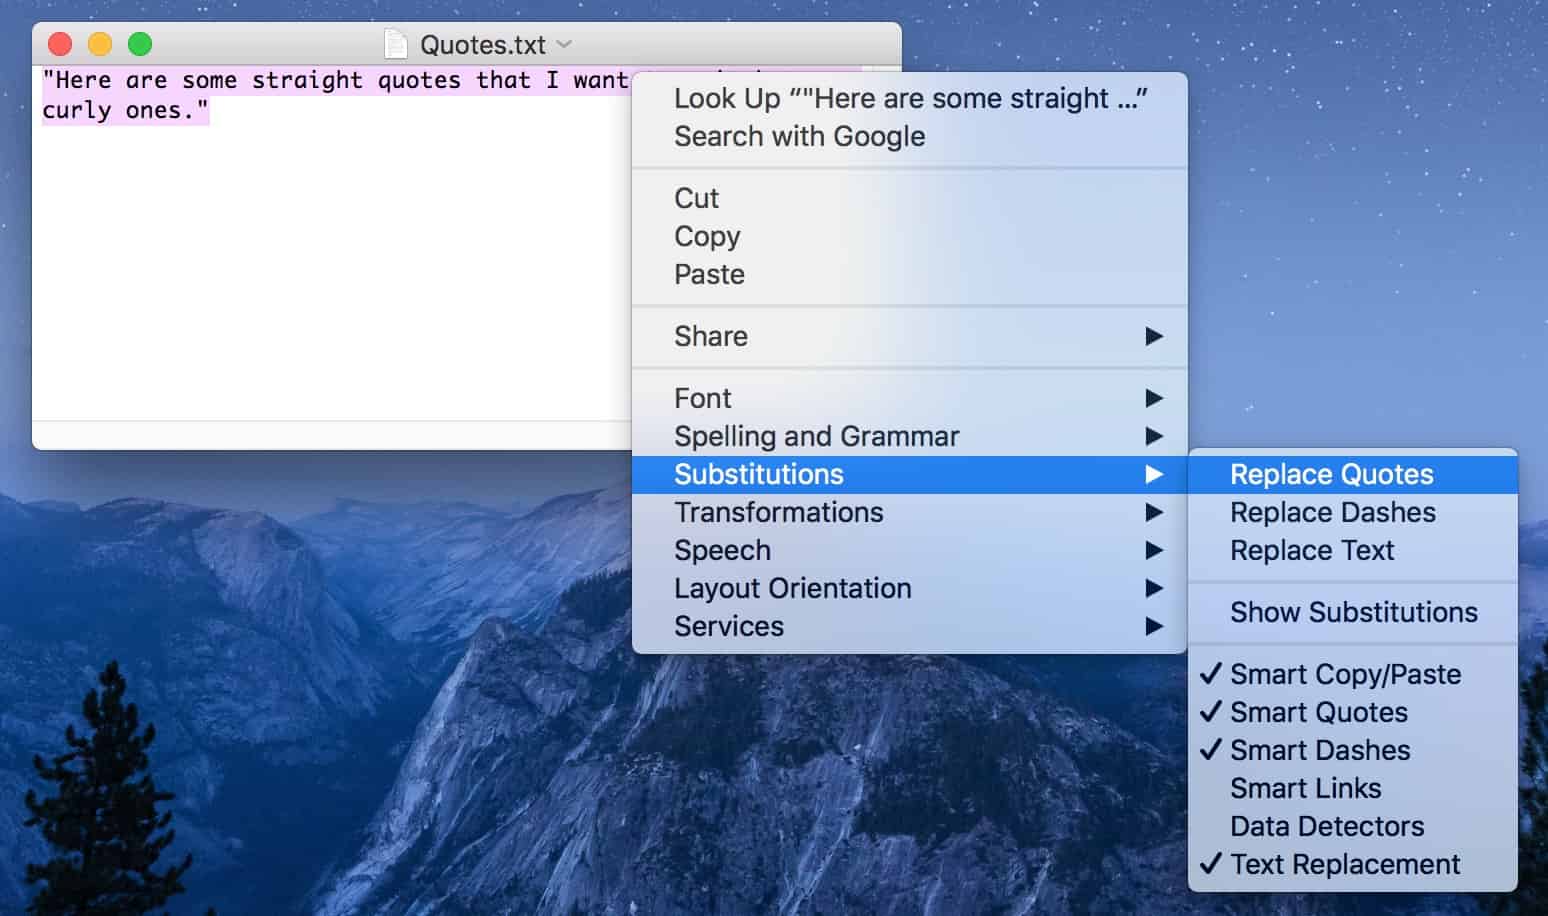 The Substitutions menu option in TextEdit includes a Replace Quotes feature